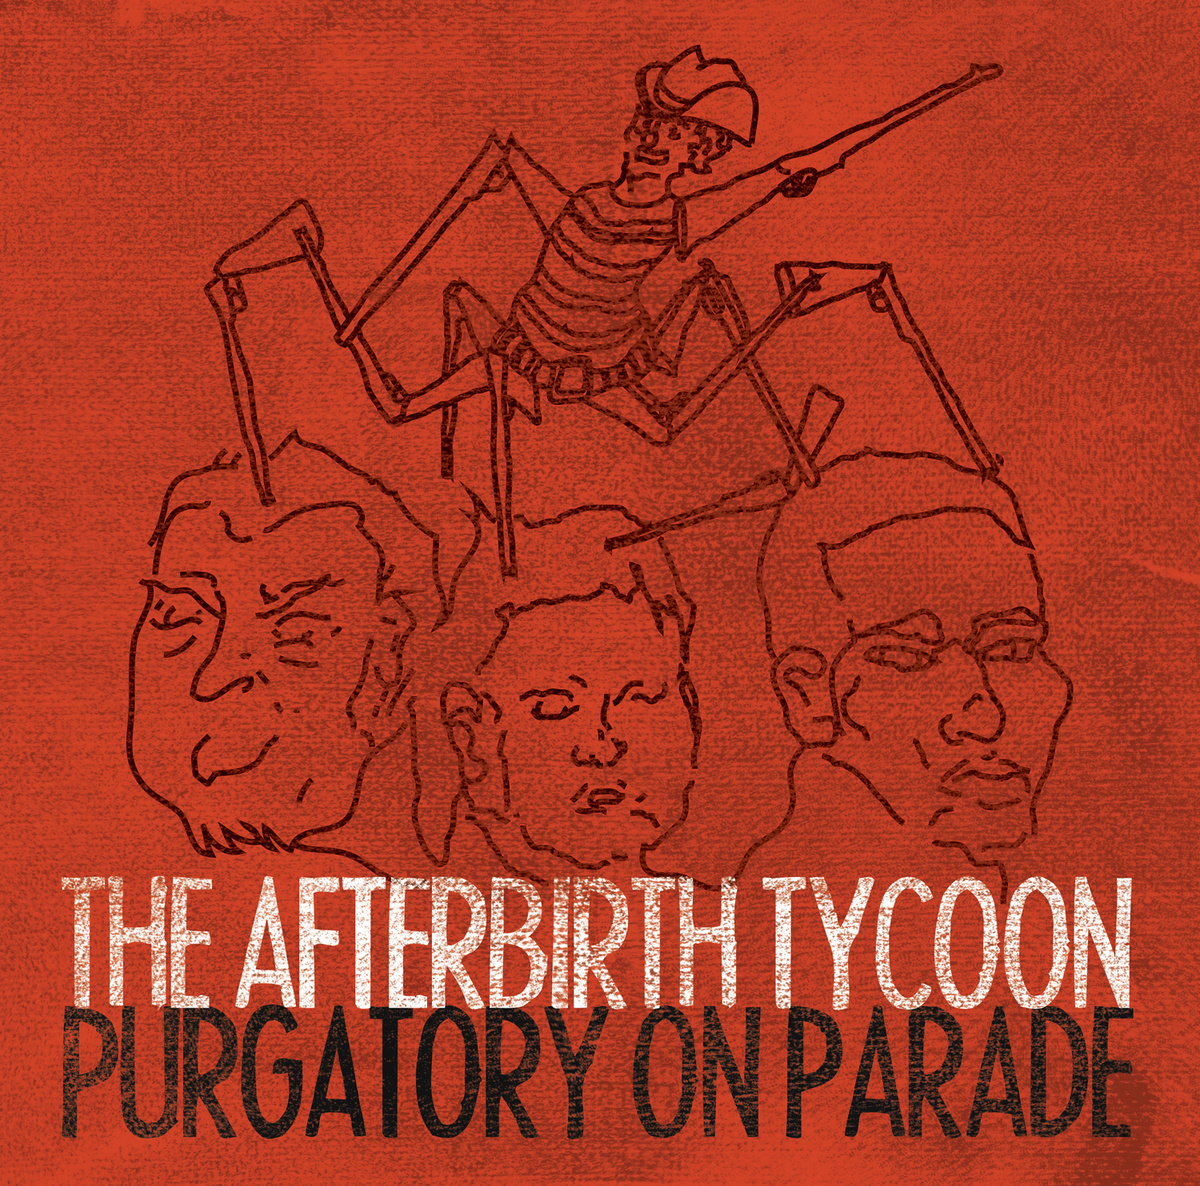 The Afterbirth Tycoon Releases Purgatory On Parade